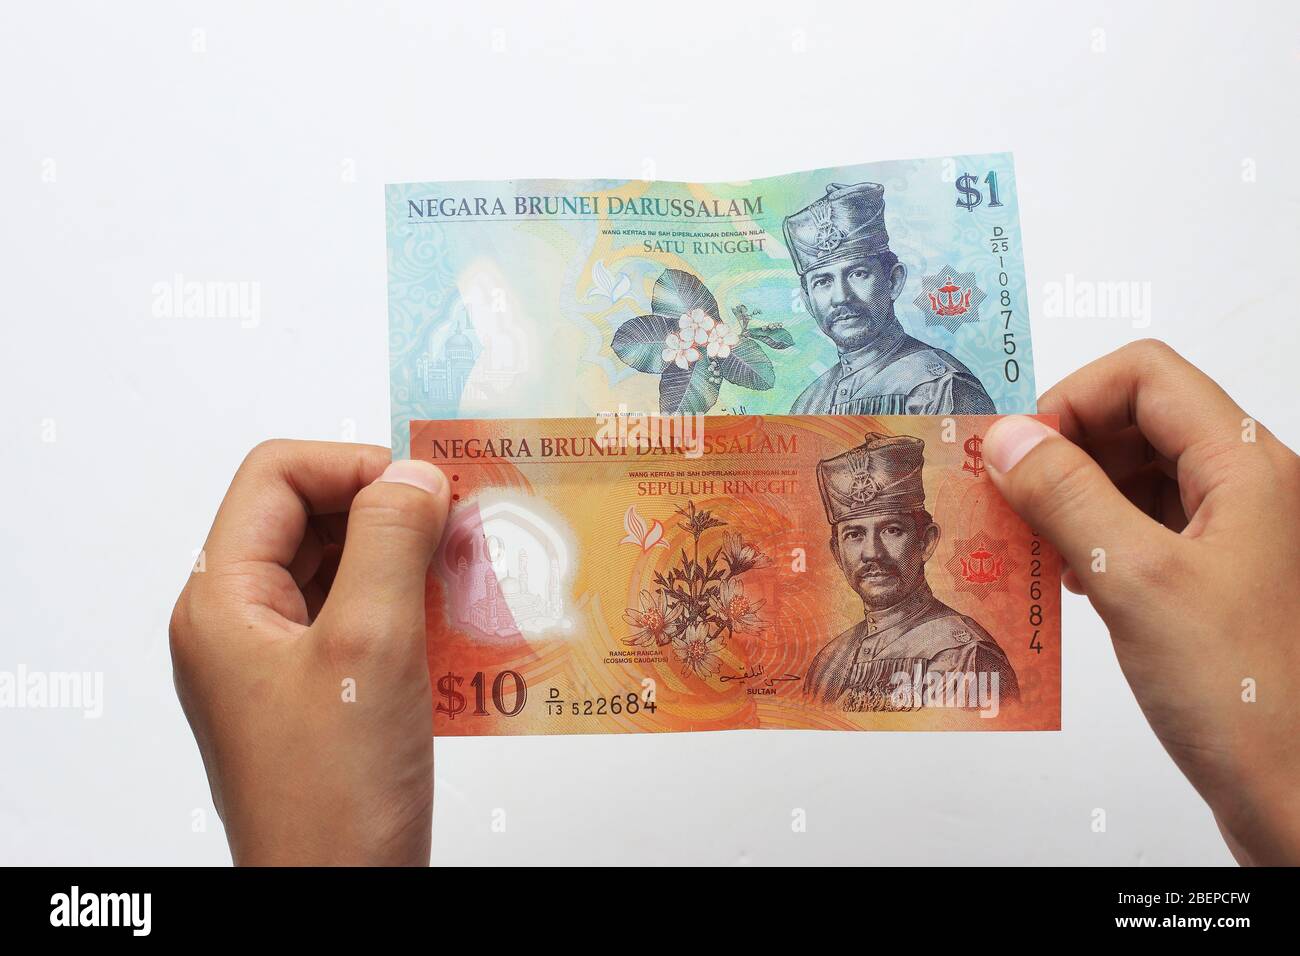 Brunei currency against white background Stock Photo